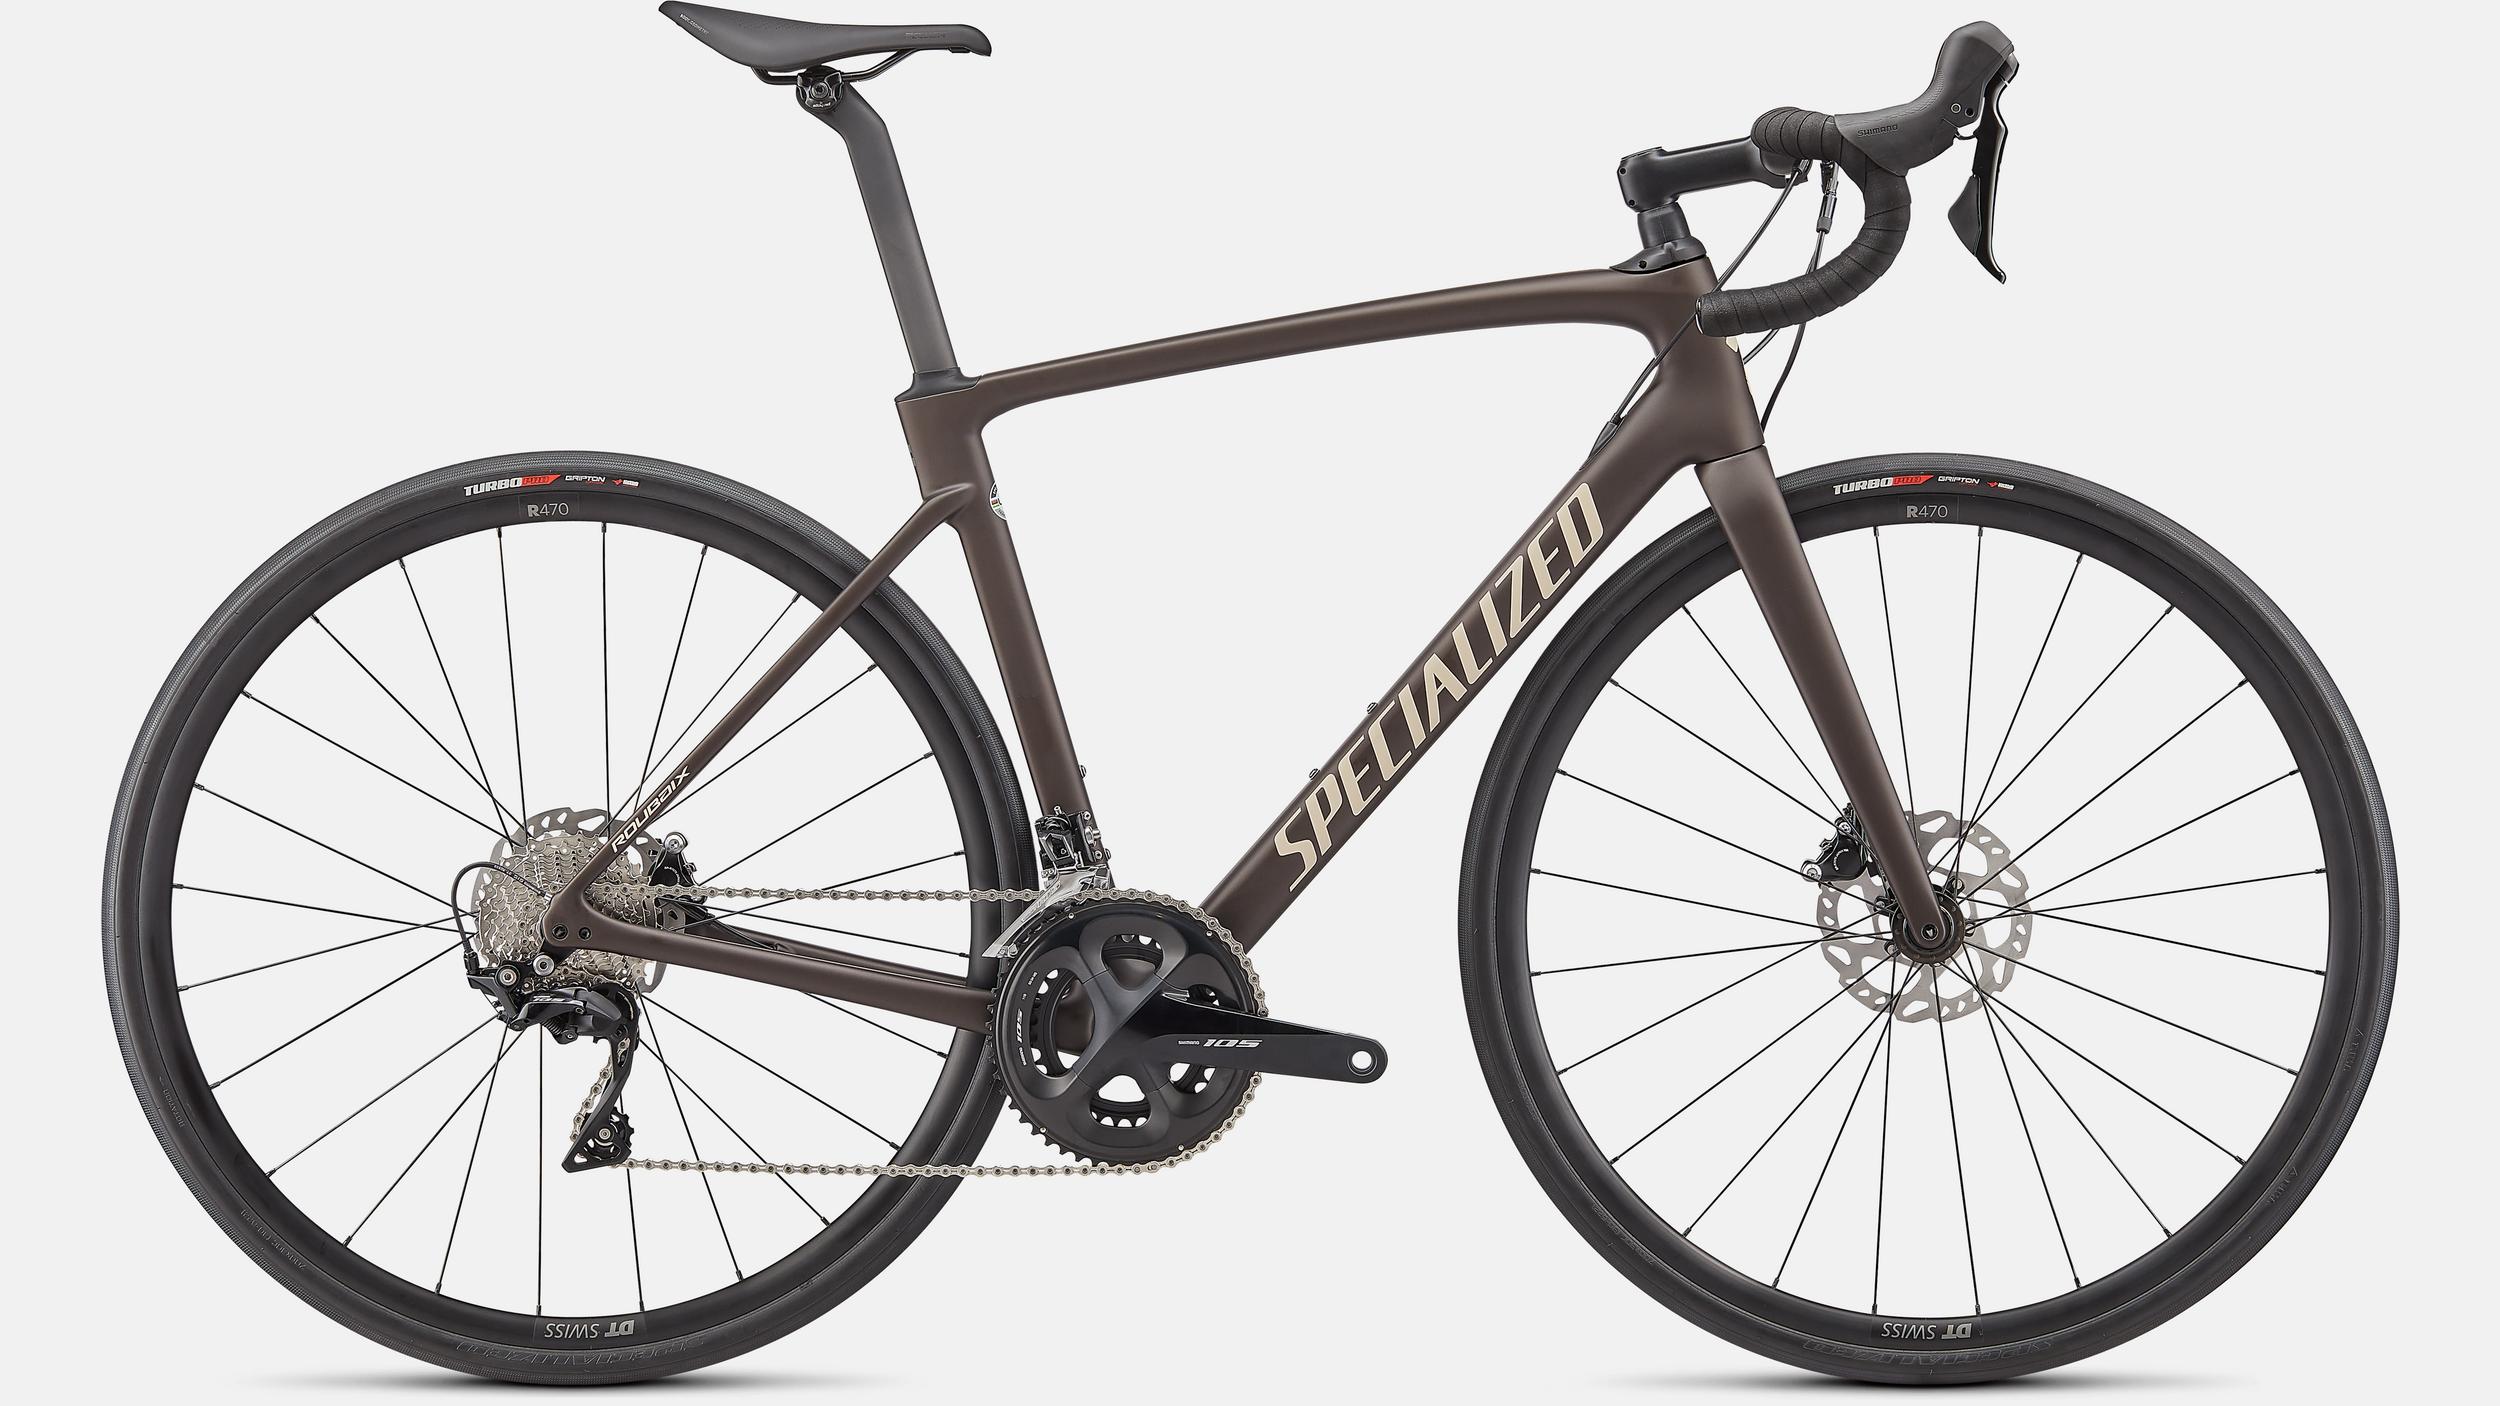 Brown Specialized Roubaix Sport carbon endurance road bike with Shimano 105 groupset and hydraulic disc brakes.